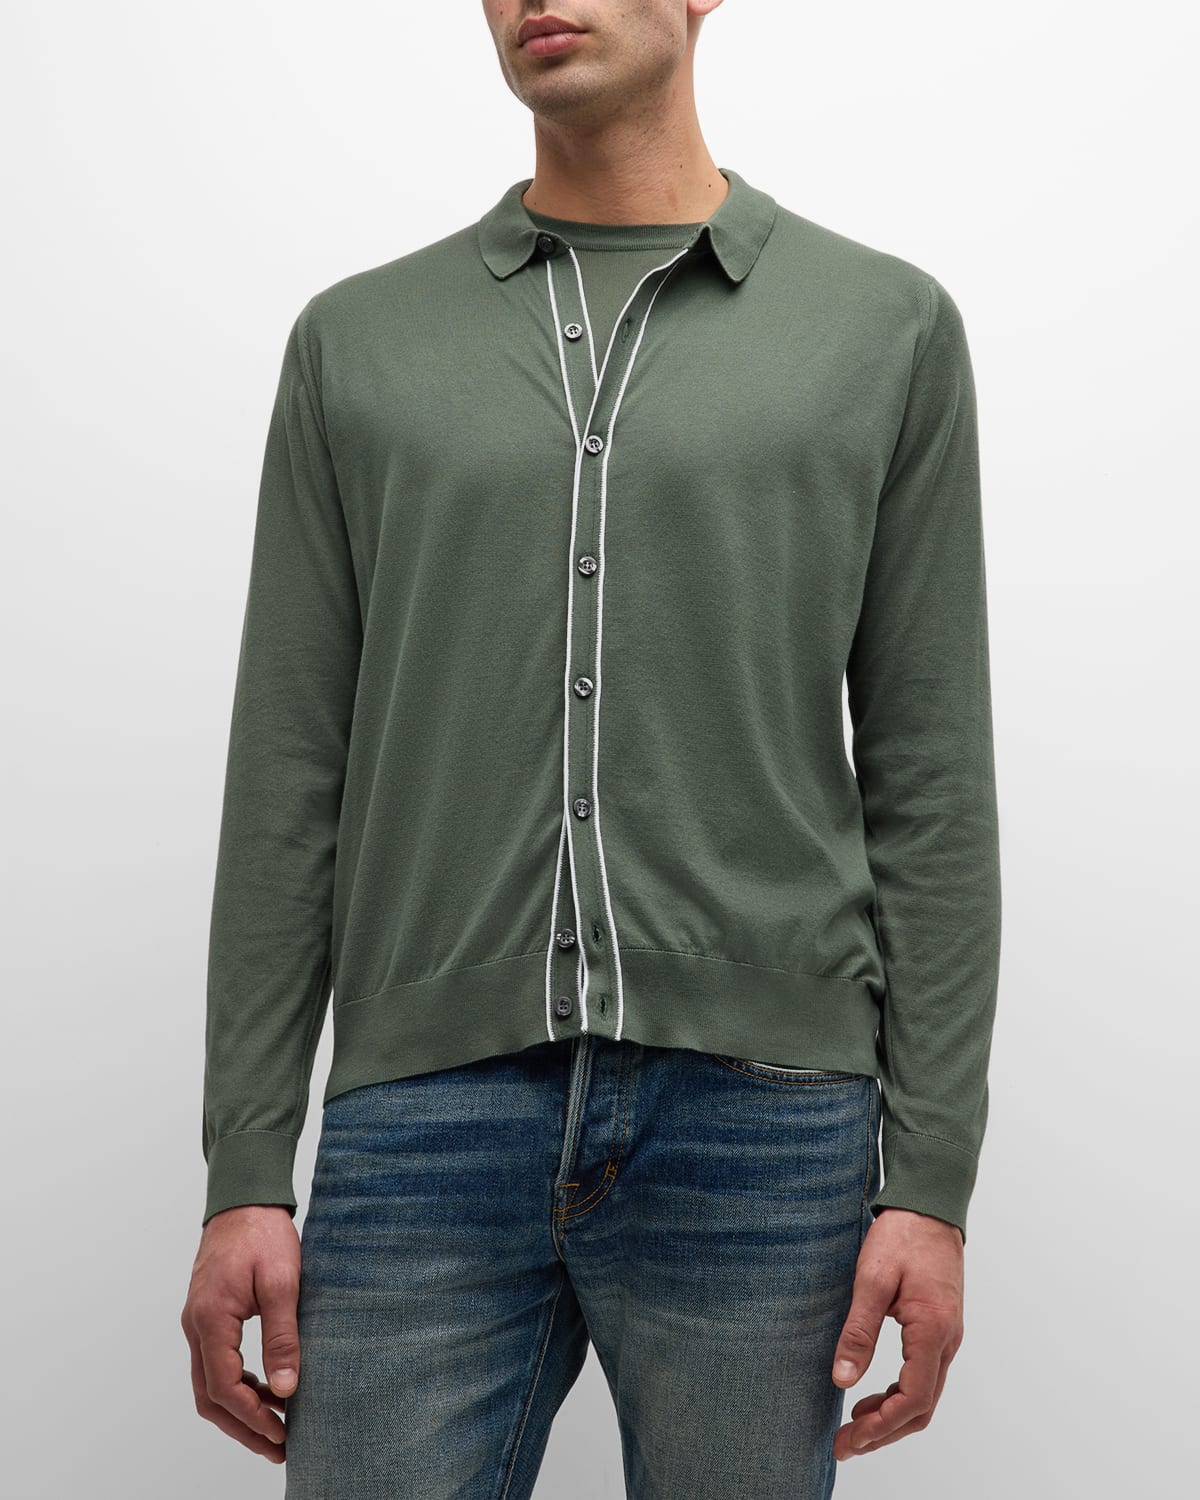 John Smedley Puck Cotton Polo Sweater In Almond